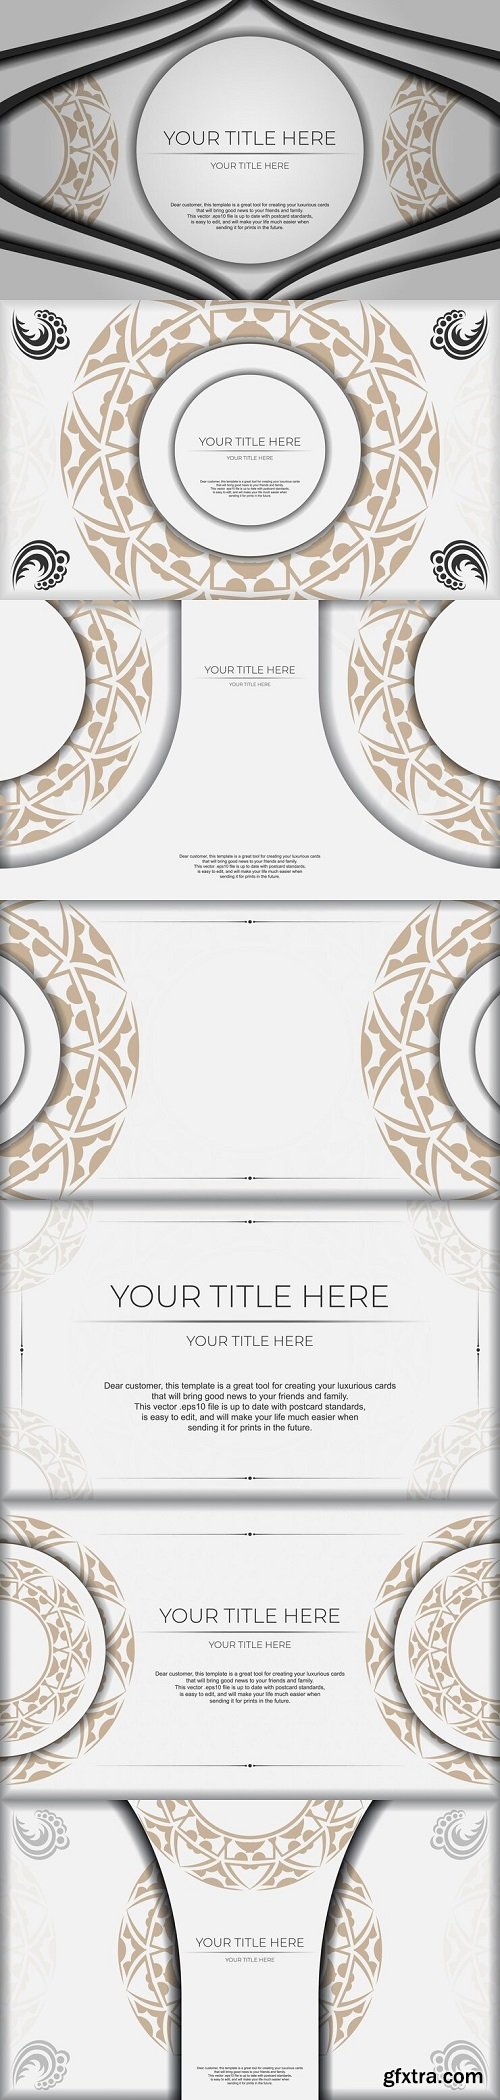 Template for postcard print design with greek ornament